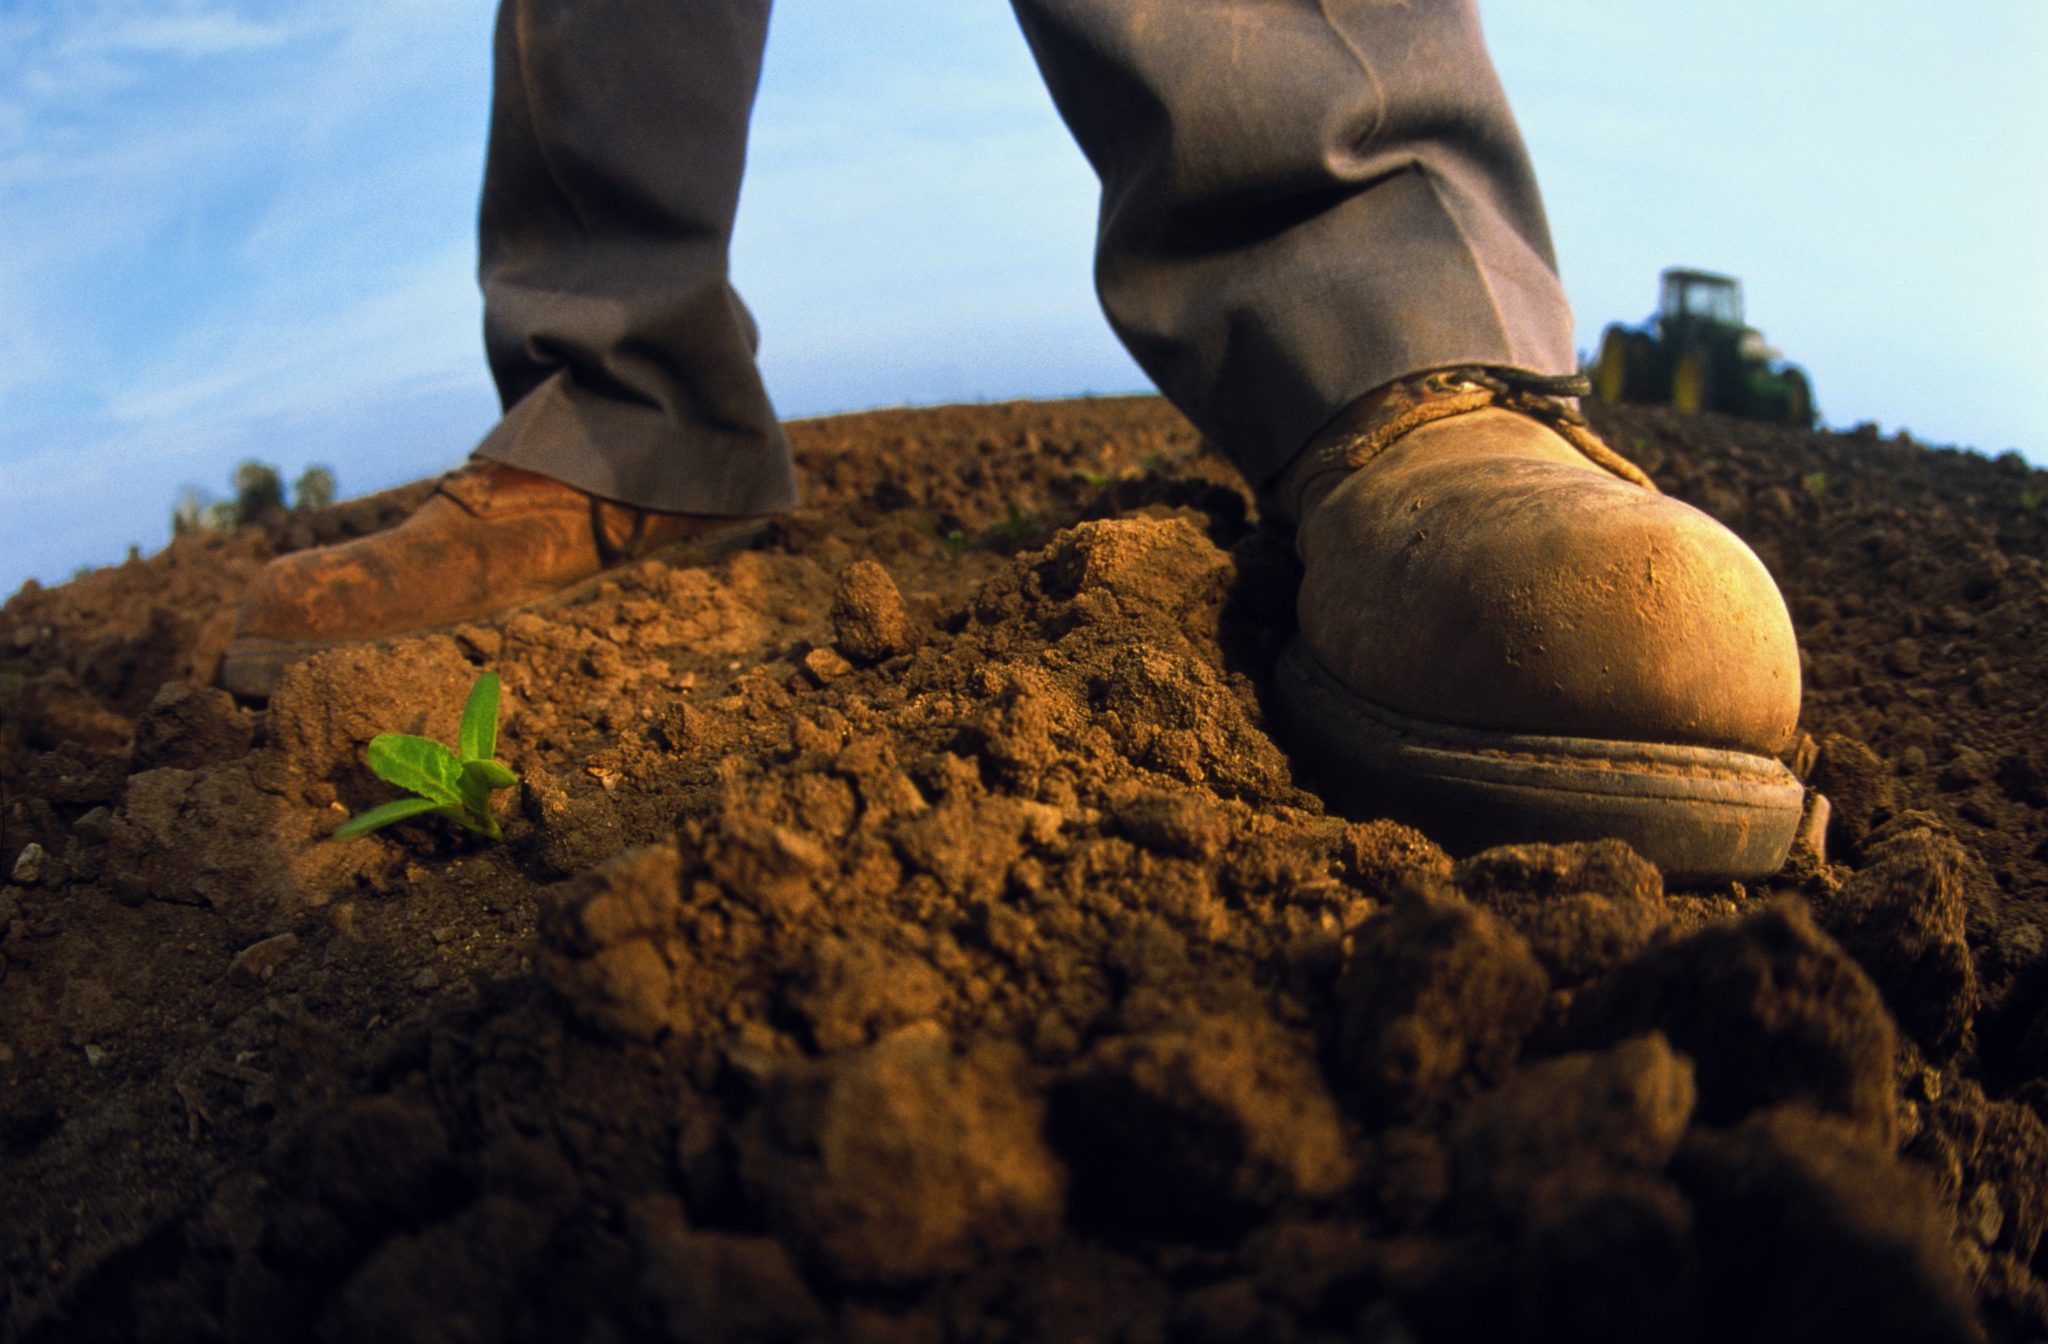 Farmers boots in the soil